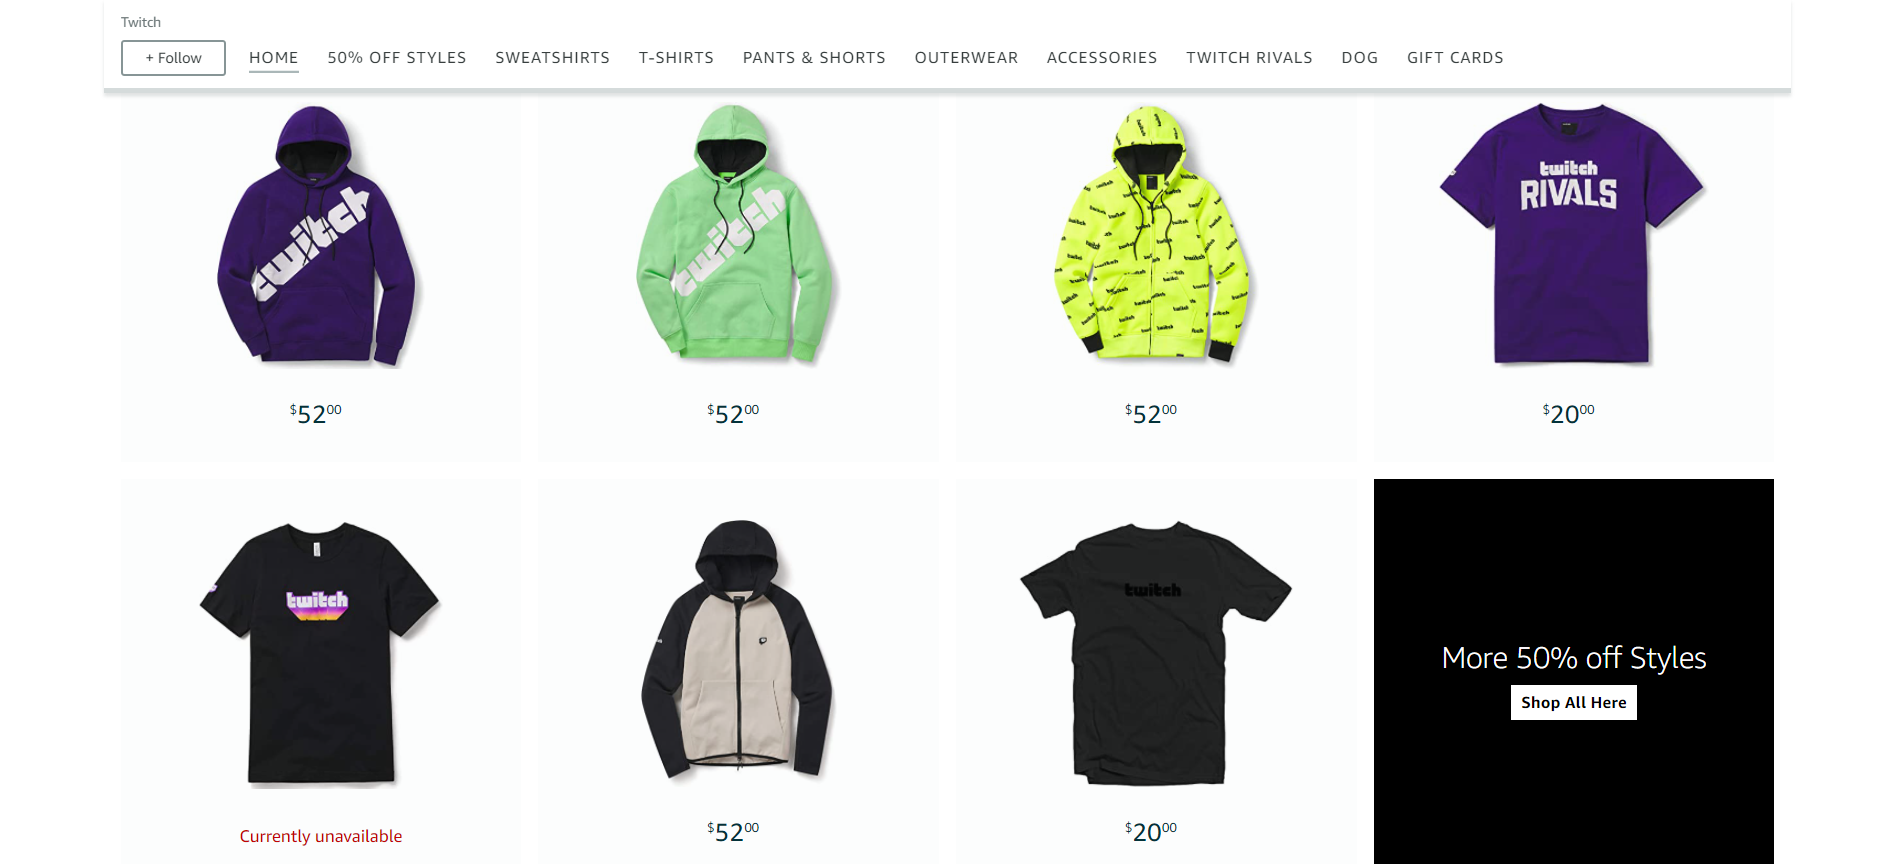 Screen capture of Twitch's online store on Amazon, selling hoodies as merch